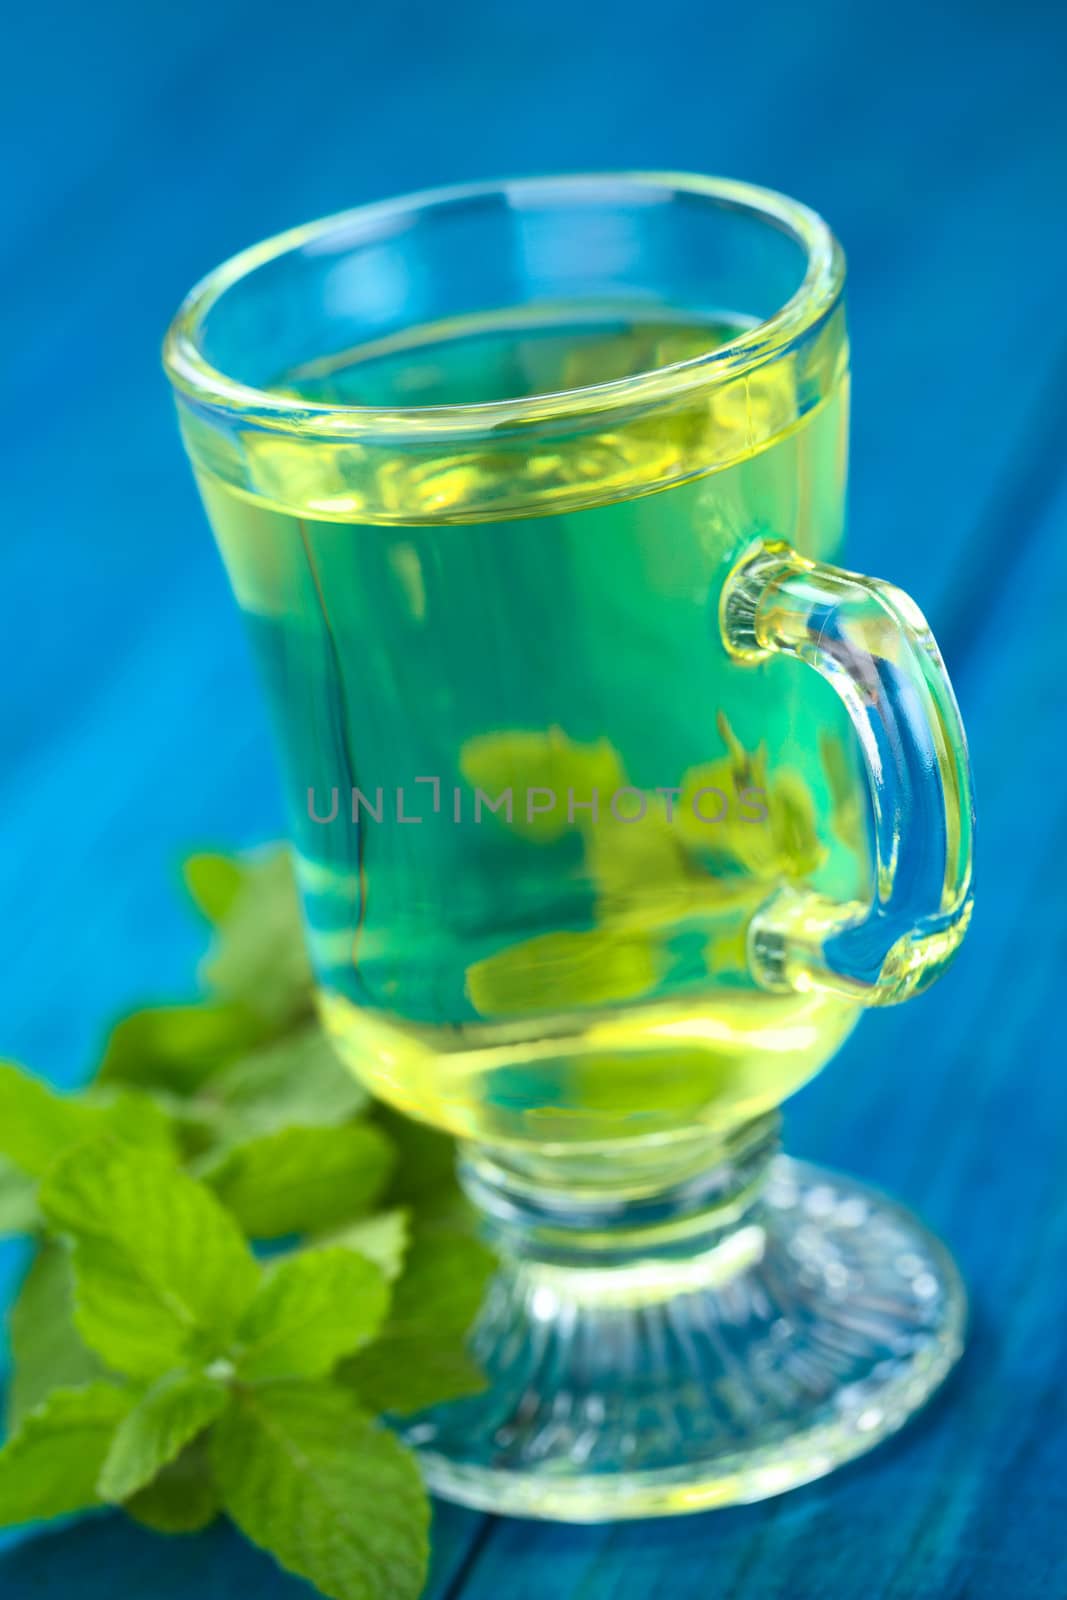 Freshly prepared tea out of the Peruvian herb called Muña (lat. Minthostachys mollis), which is a herbal and medicinal plant with a taste similar to mint, and is either prepared as tea or used as a spice in some regions (Selective Focus, Focus on the front rim of the glass)